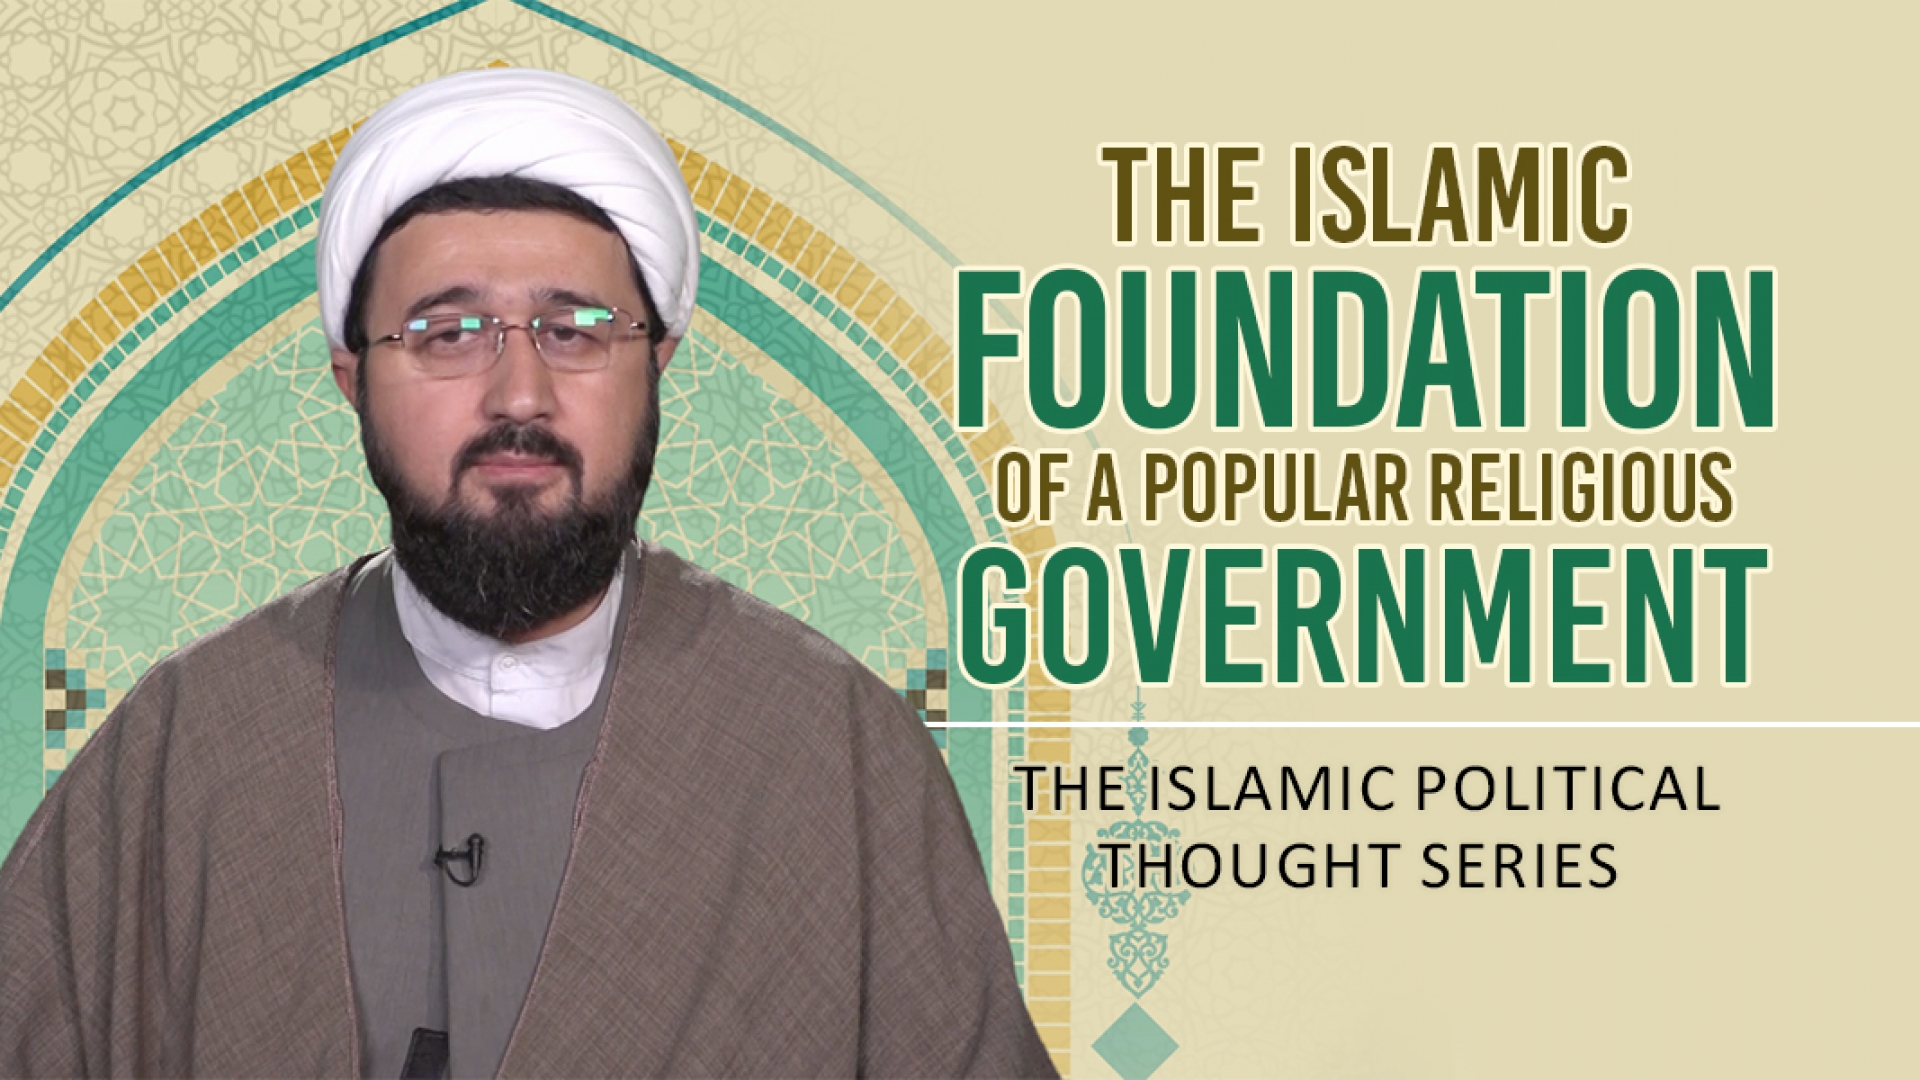 The Islamic Foundation of a Popular Religious Government | The Islamic Political Thought Series | Farsi sub English